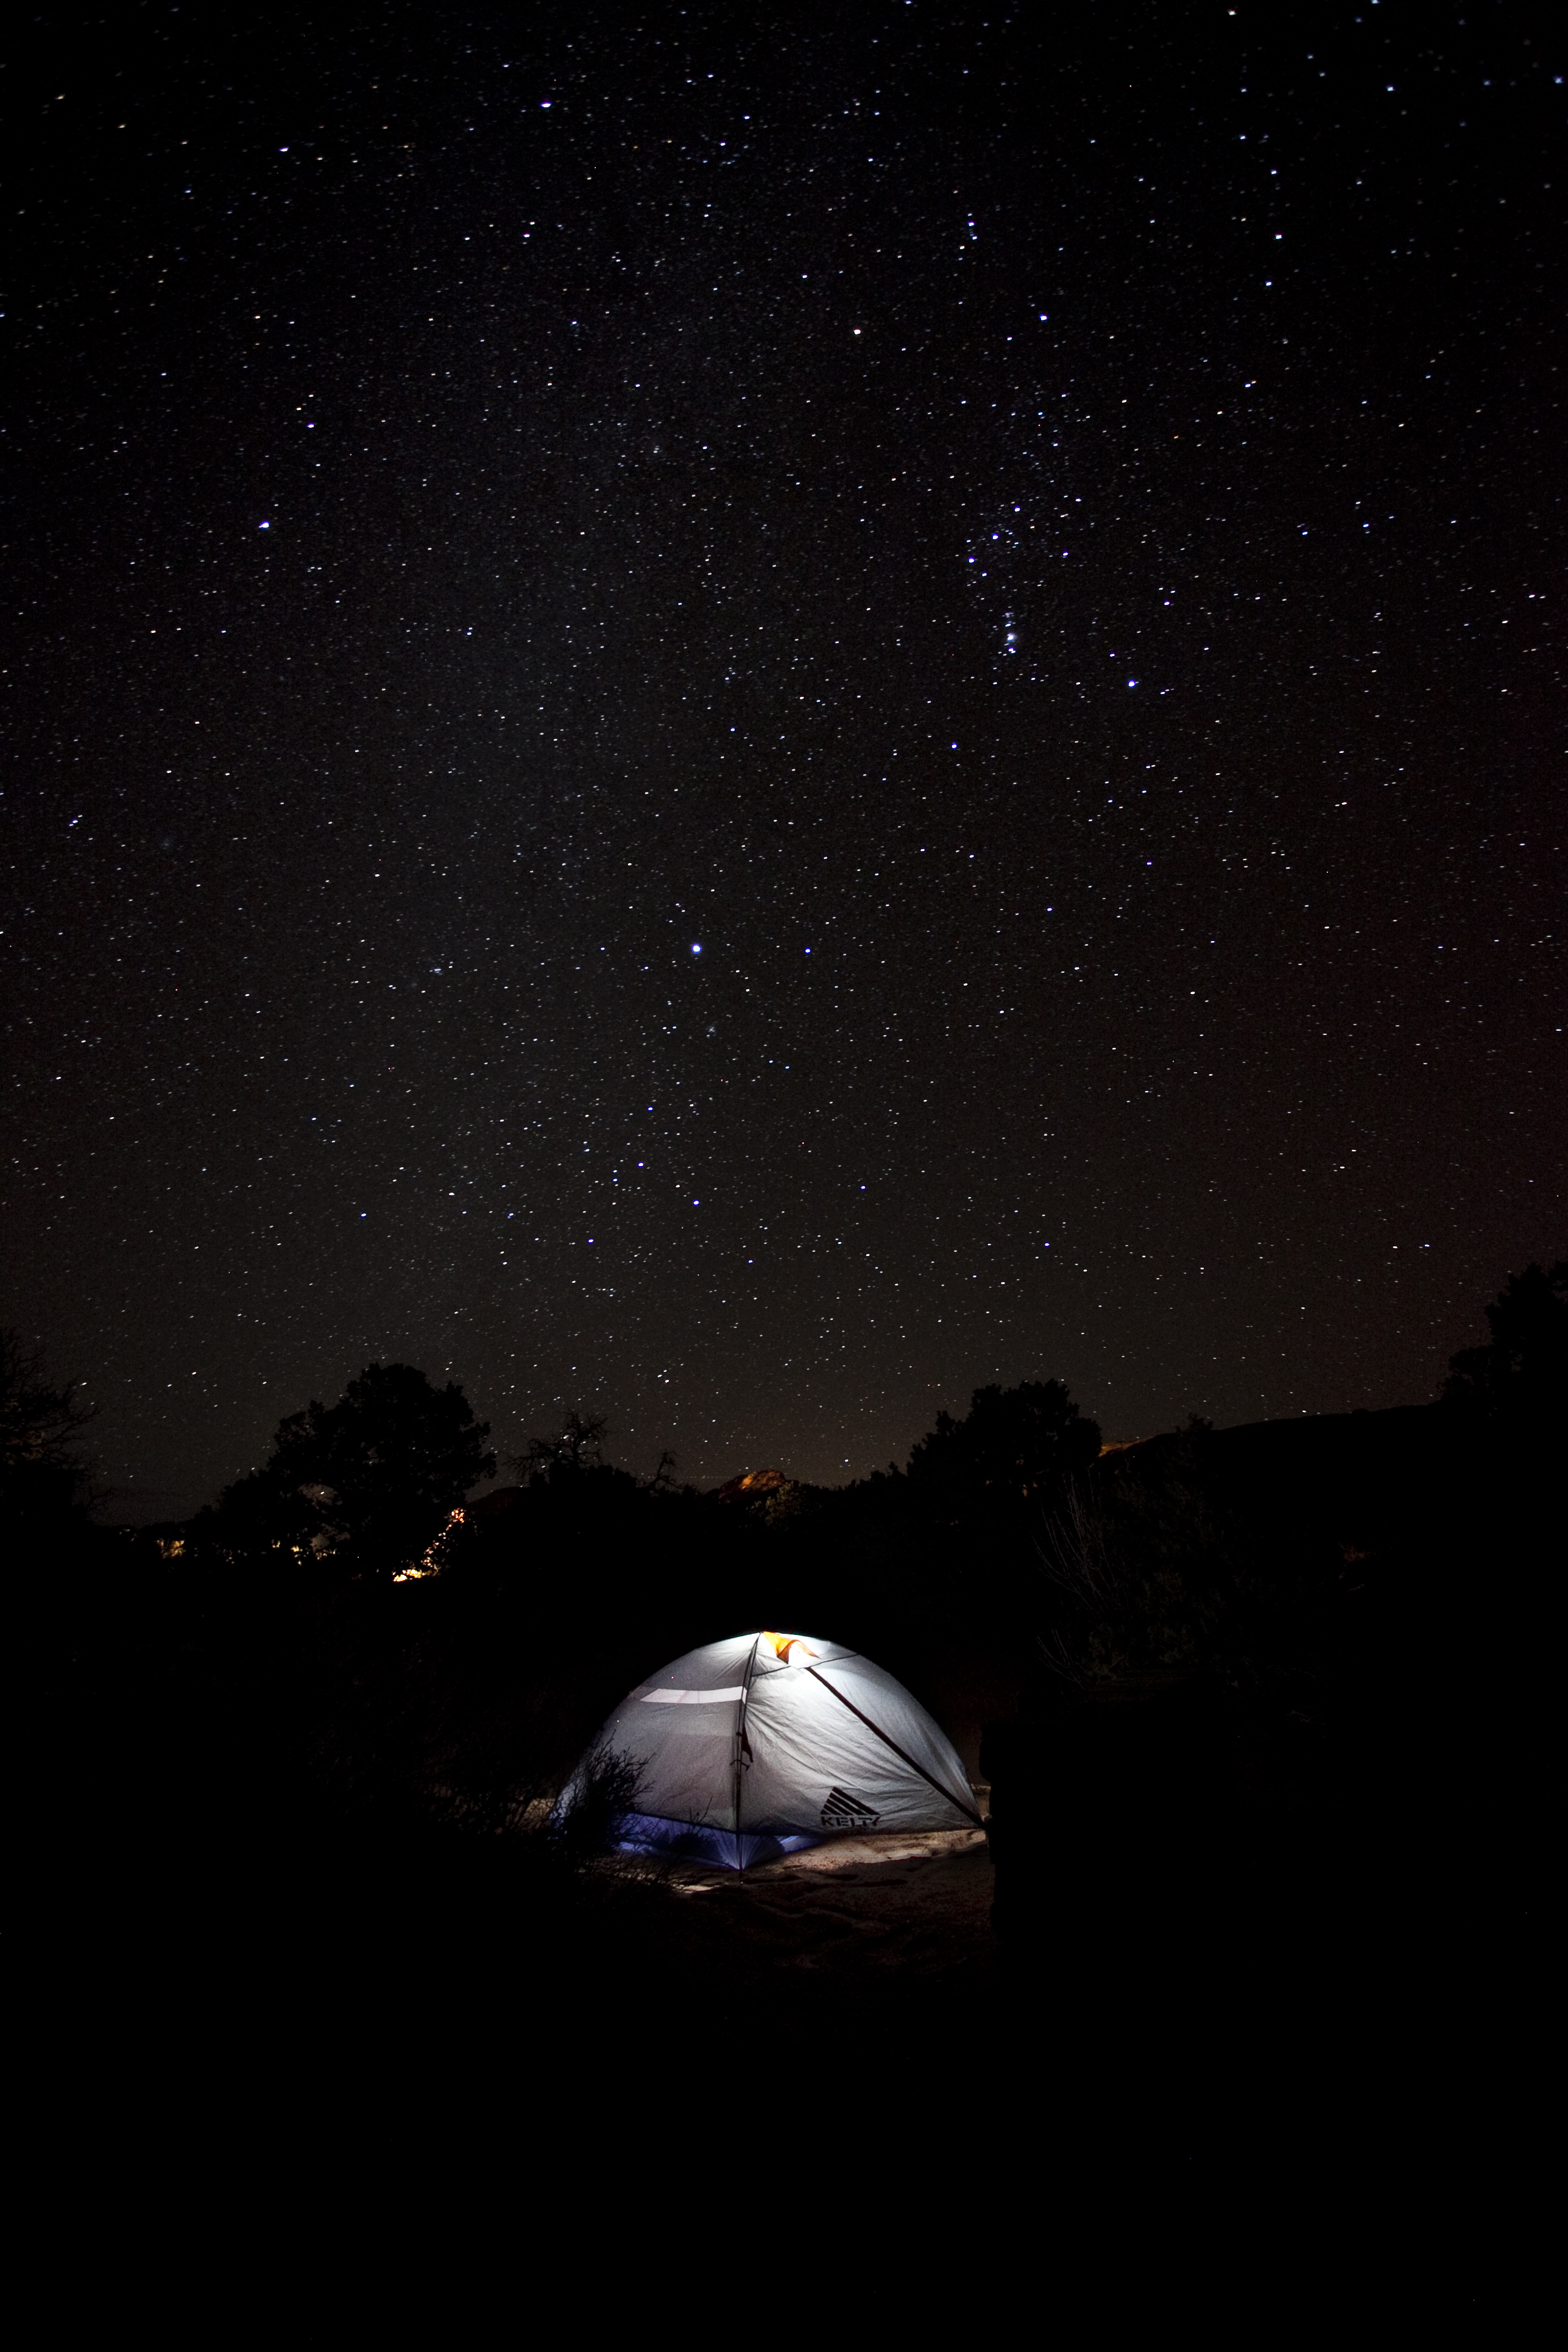 campsite, nature, night, starry sky, tent, camping